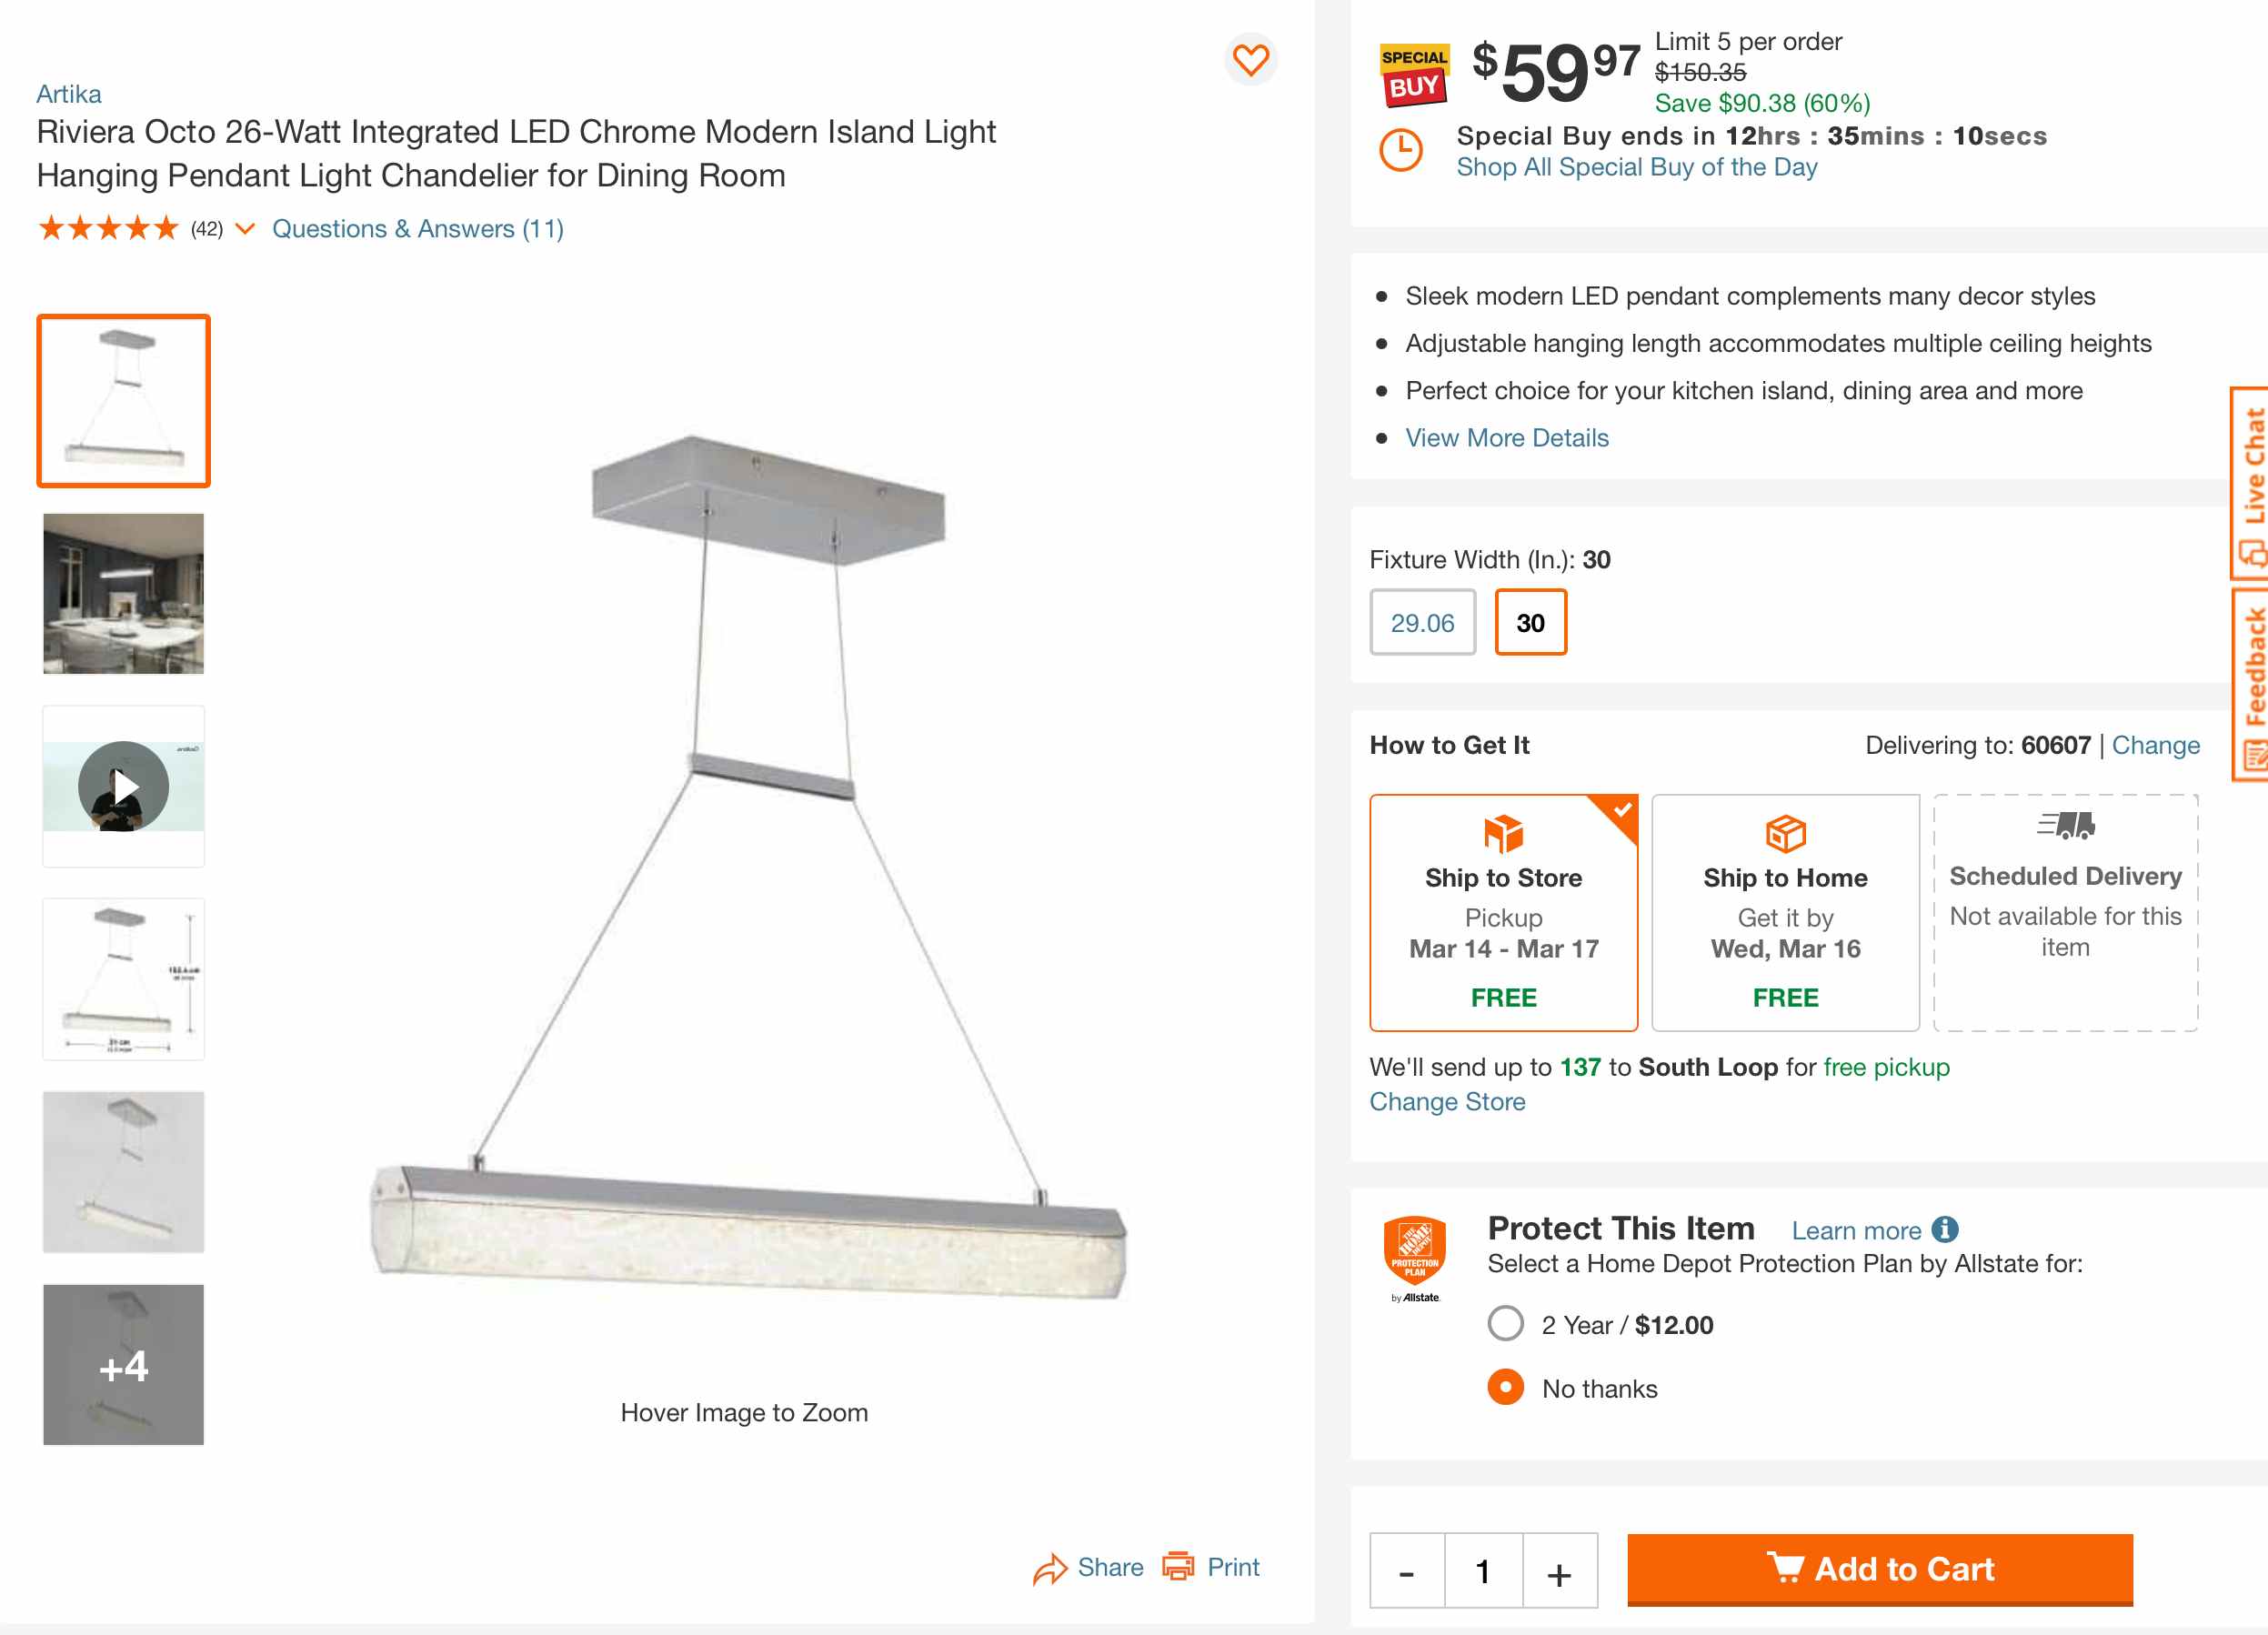 Home Depot special buy of the day light fixture screenshot